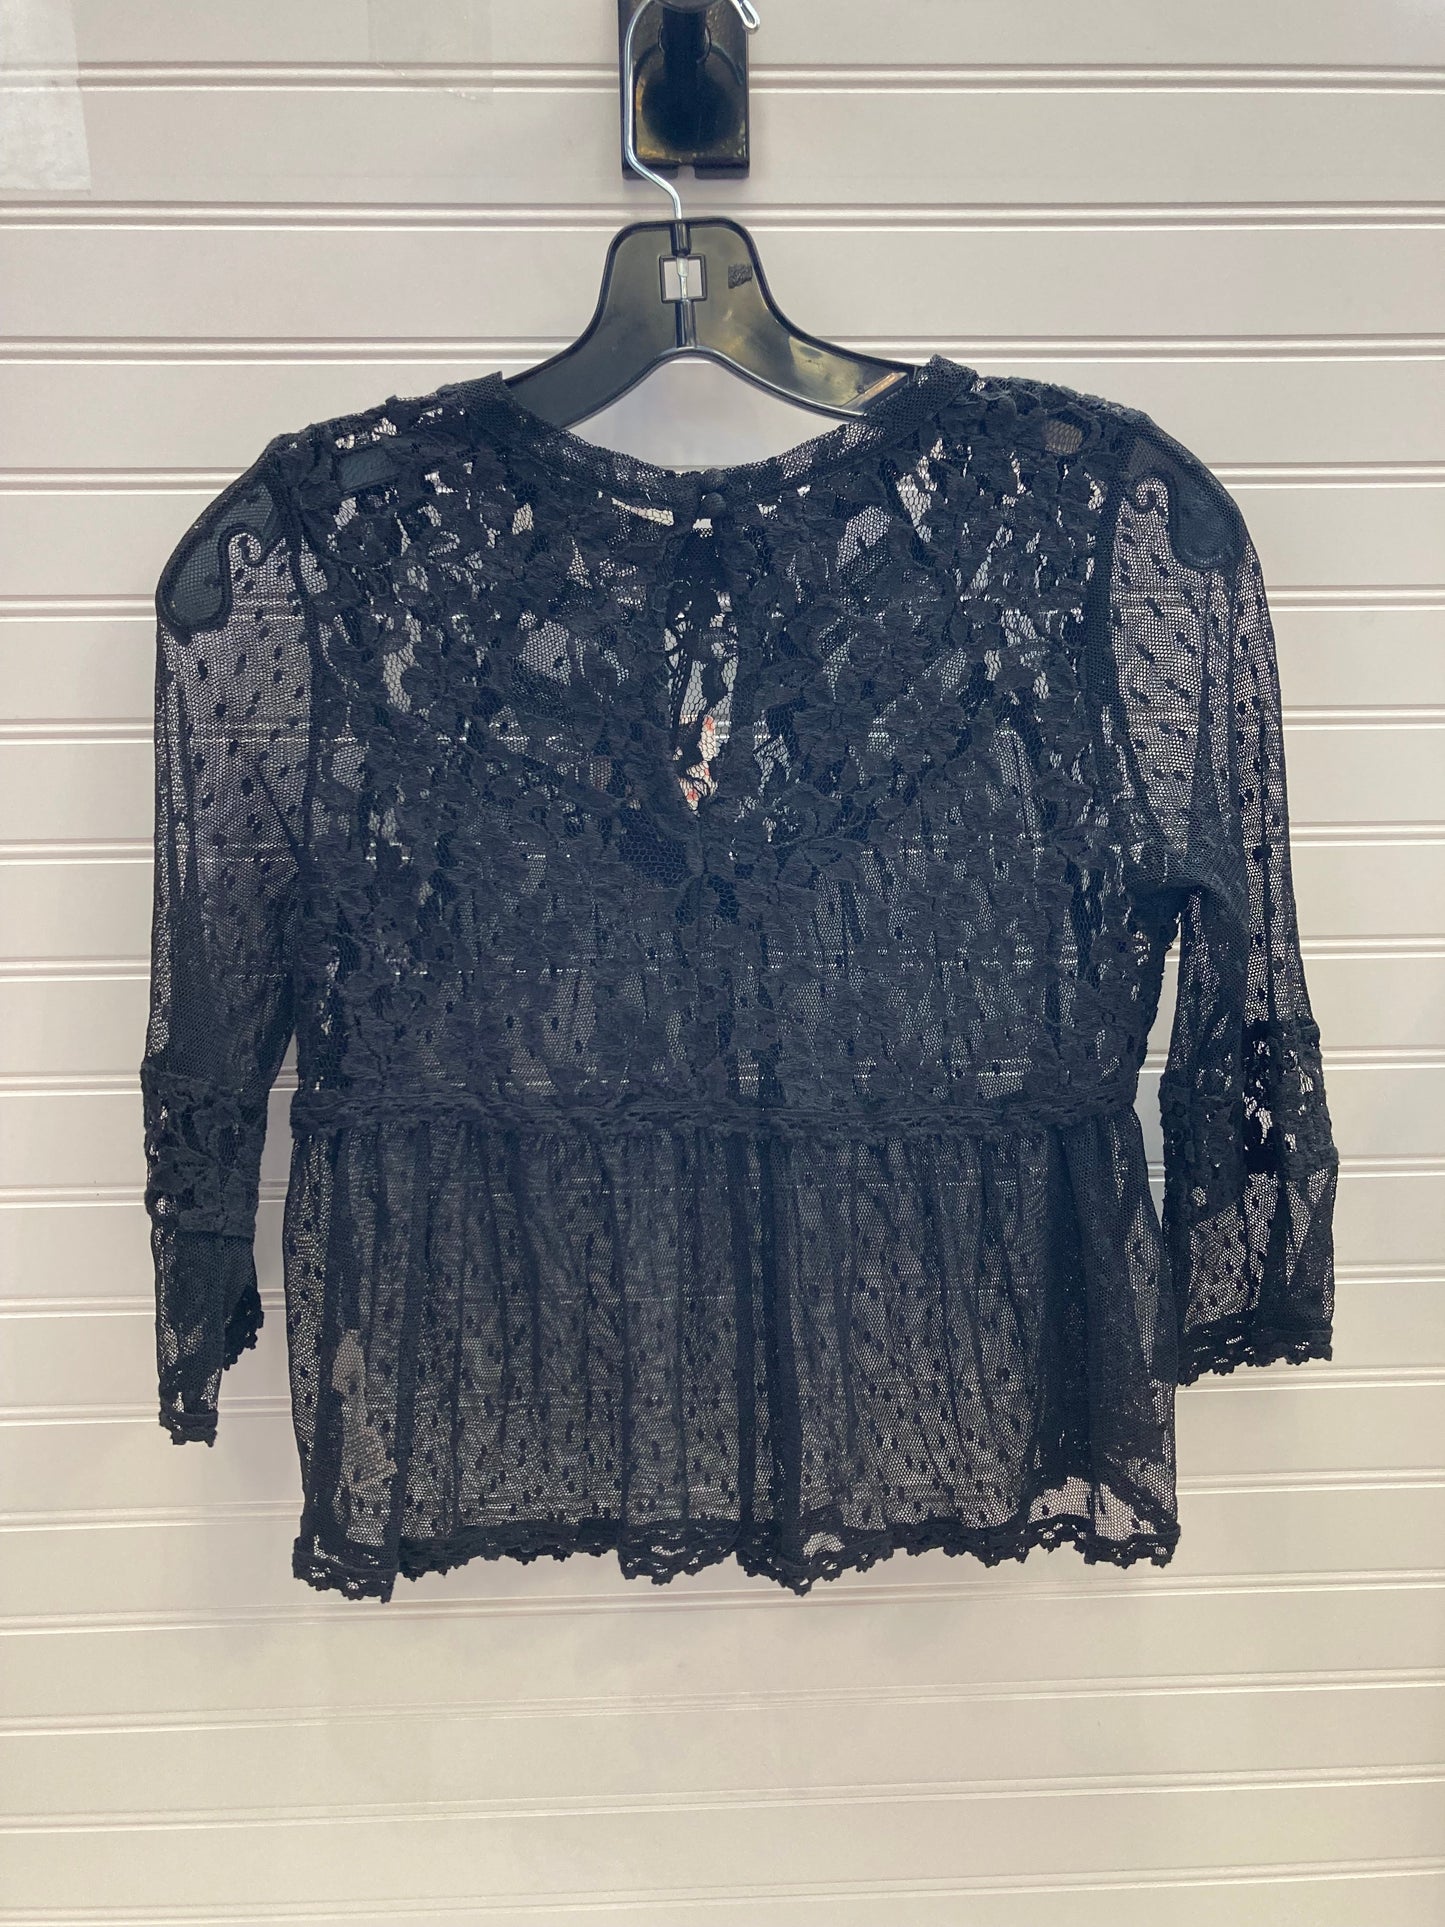 Black Top 3/4 Sleeve Free People, Size Xs